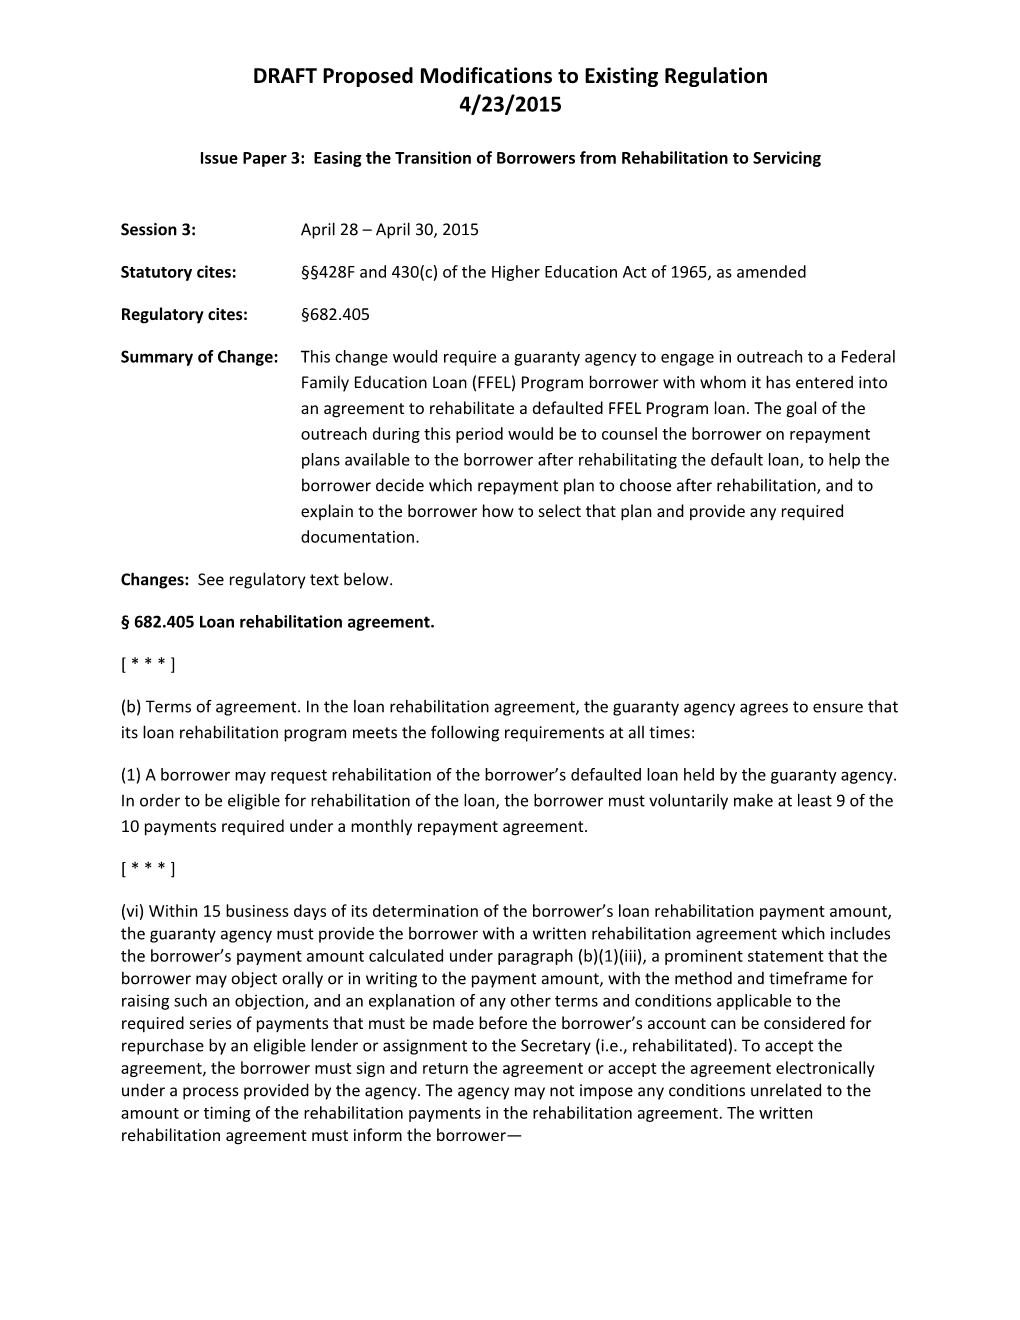 Negotiated Rulemaking for Higher Education 2015: Loans, Session 3, Issue 3: Easing The